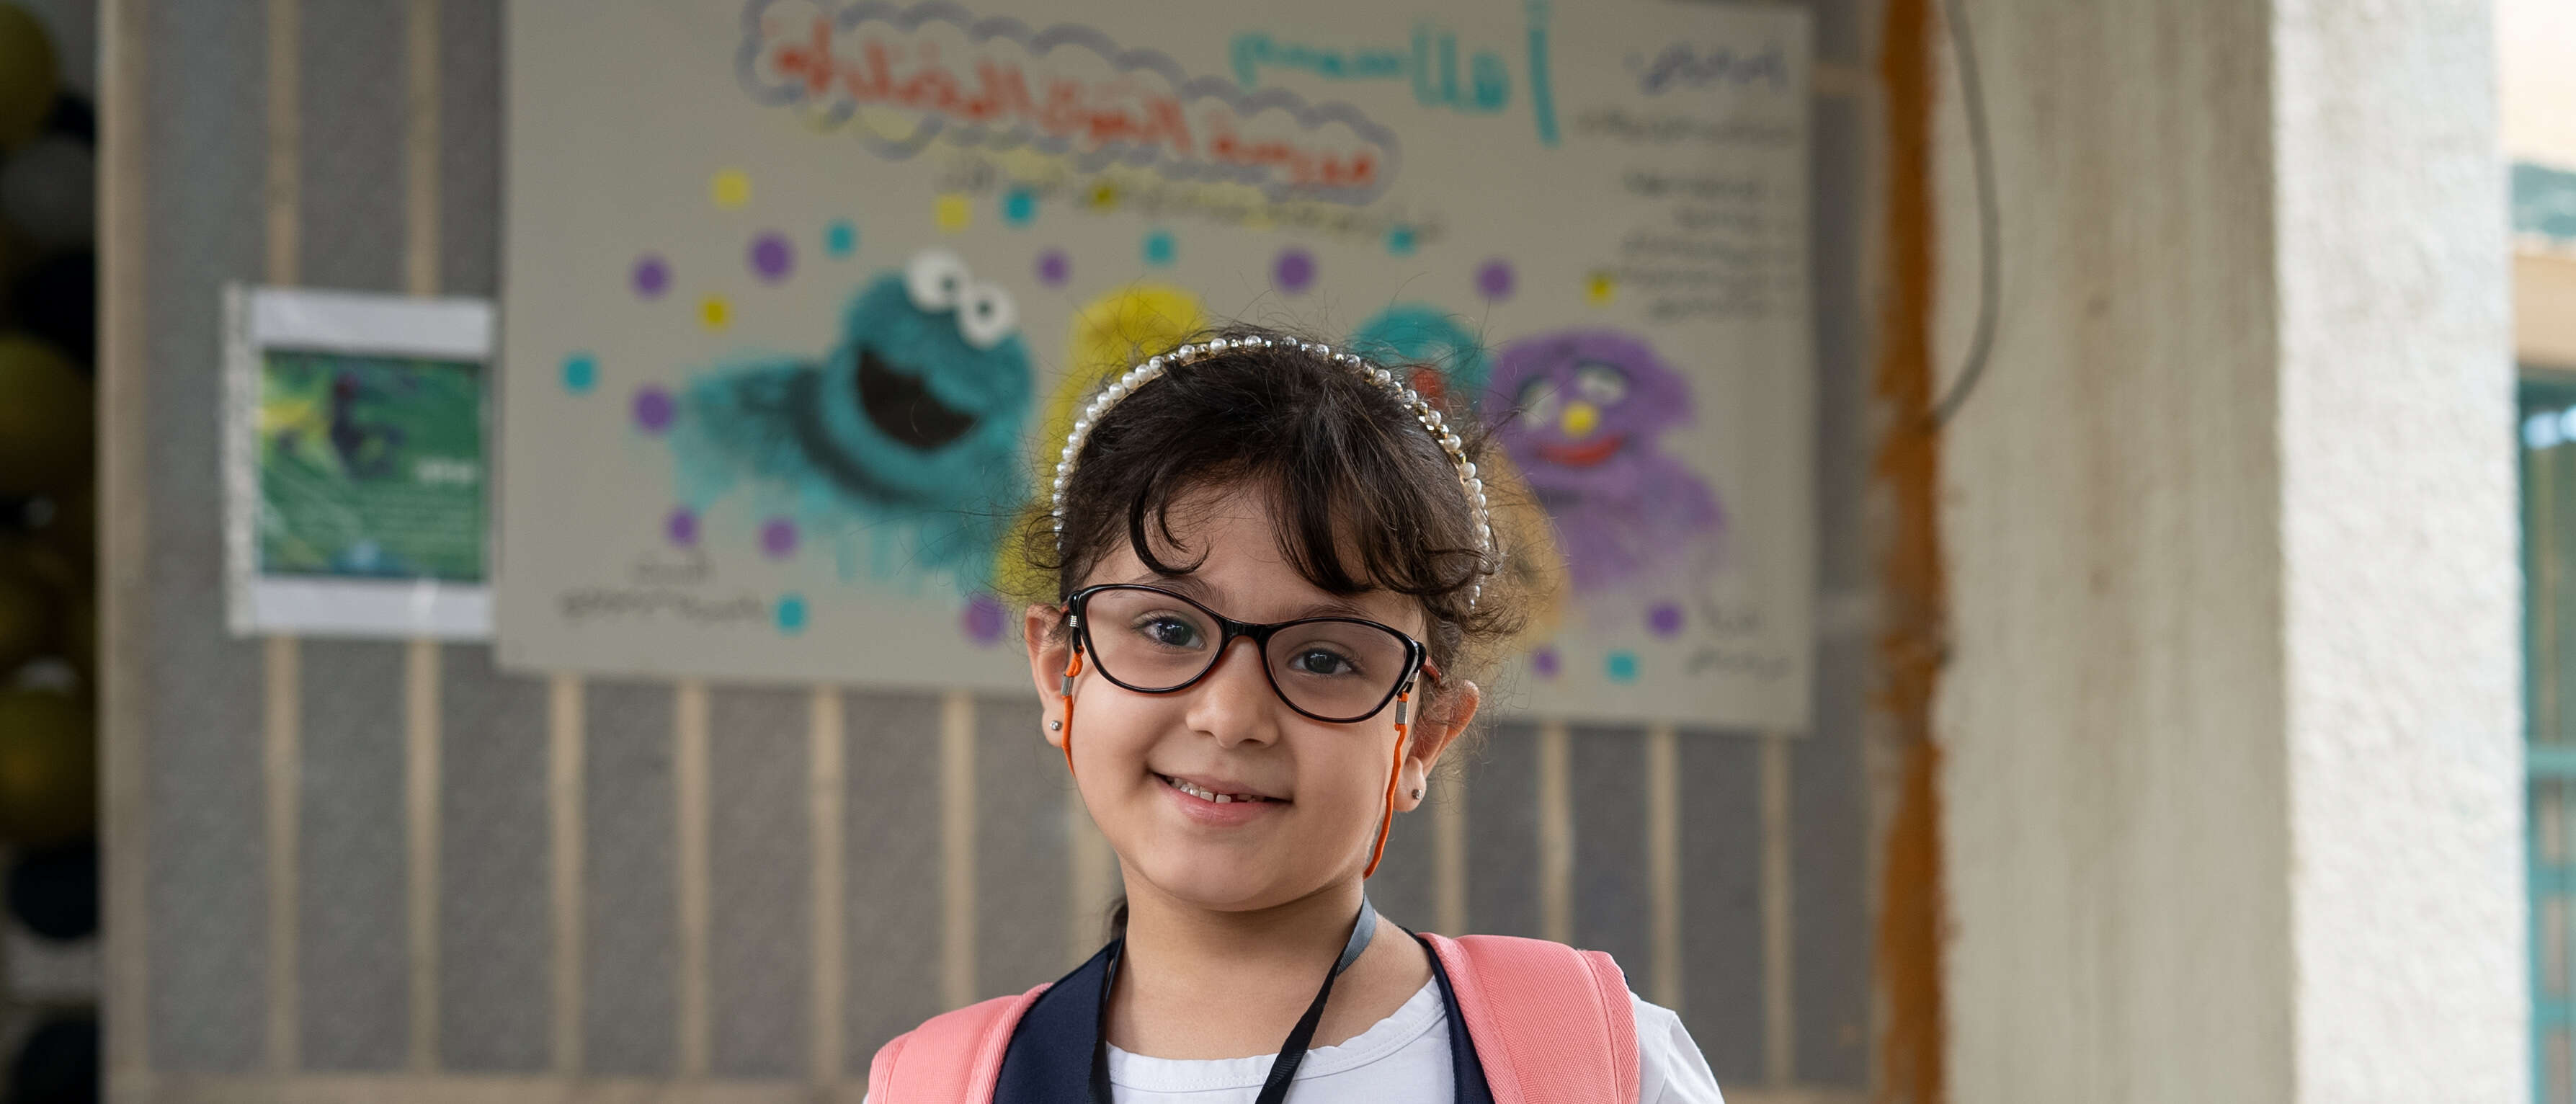 A girl in a classroom smiles and poses for a portrait.